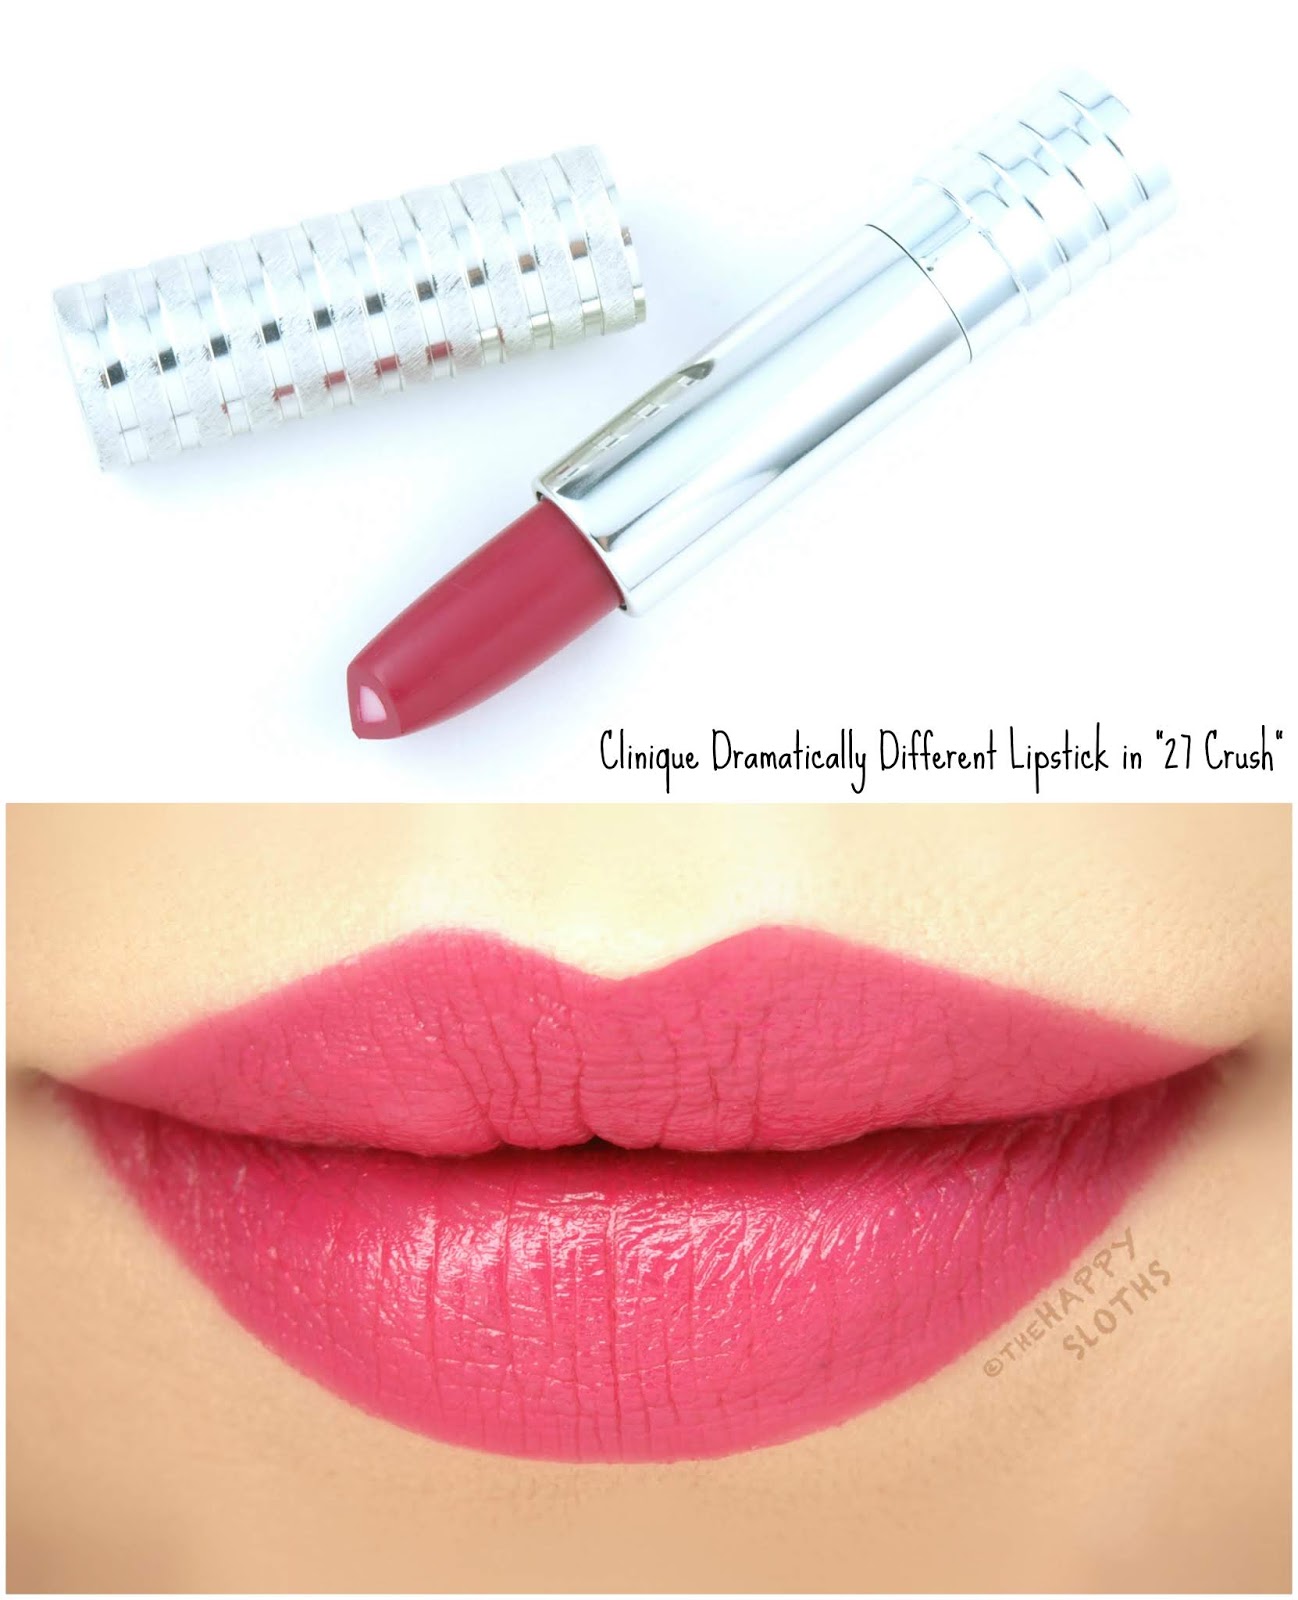 Clinique | Dramatically Different Lipstick Shaping Lip Color in "27 Crush": Review and Swatches